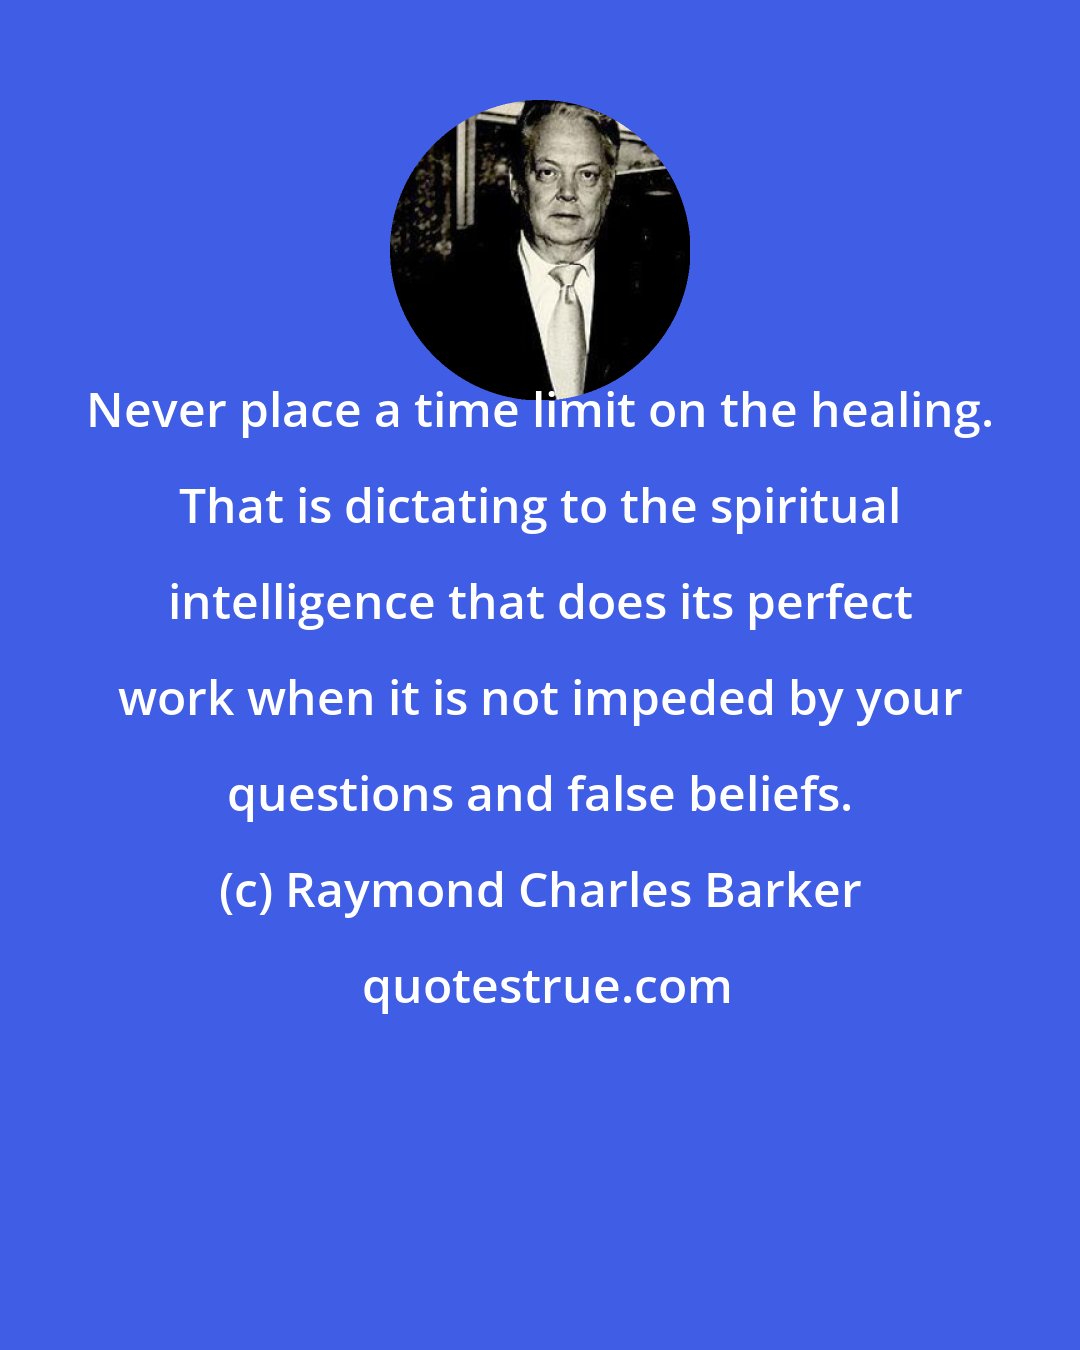 Raymond Charles Barker: Never place a time limit on the healing. That is dictating to the spiritual intelligence that does its perfect work when it is not impeded by your questions and false beliefs.